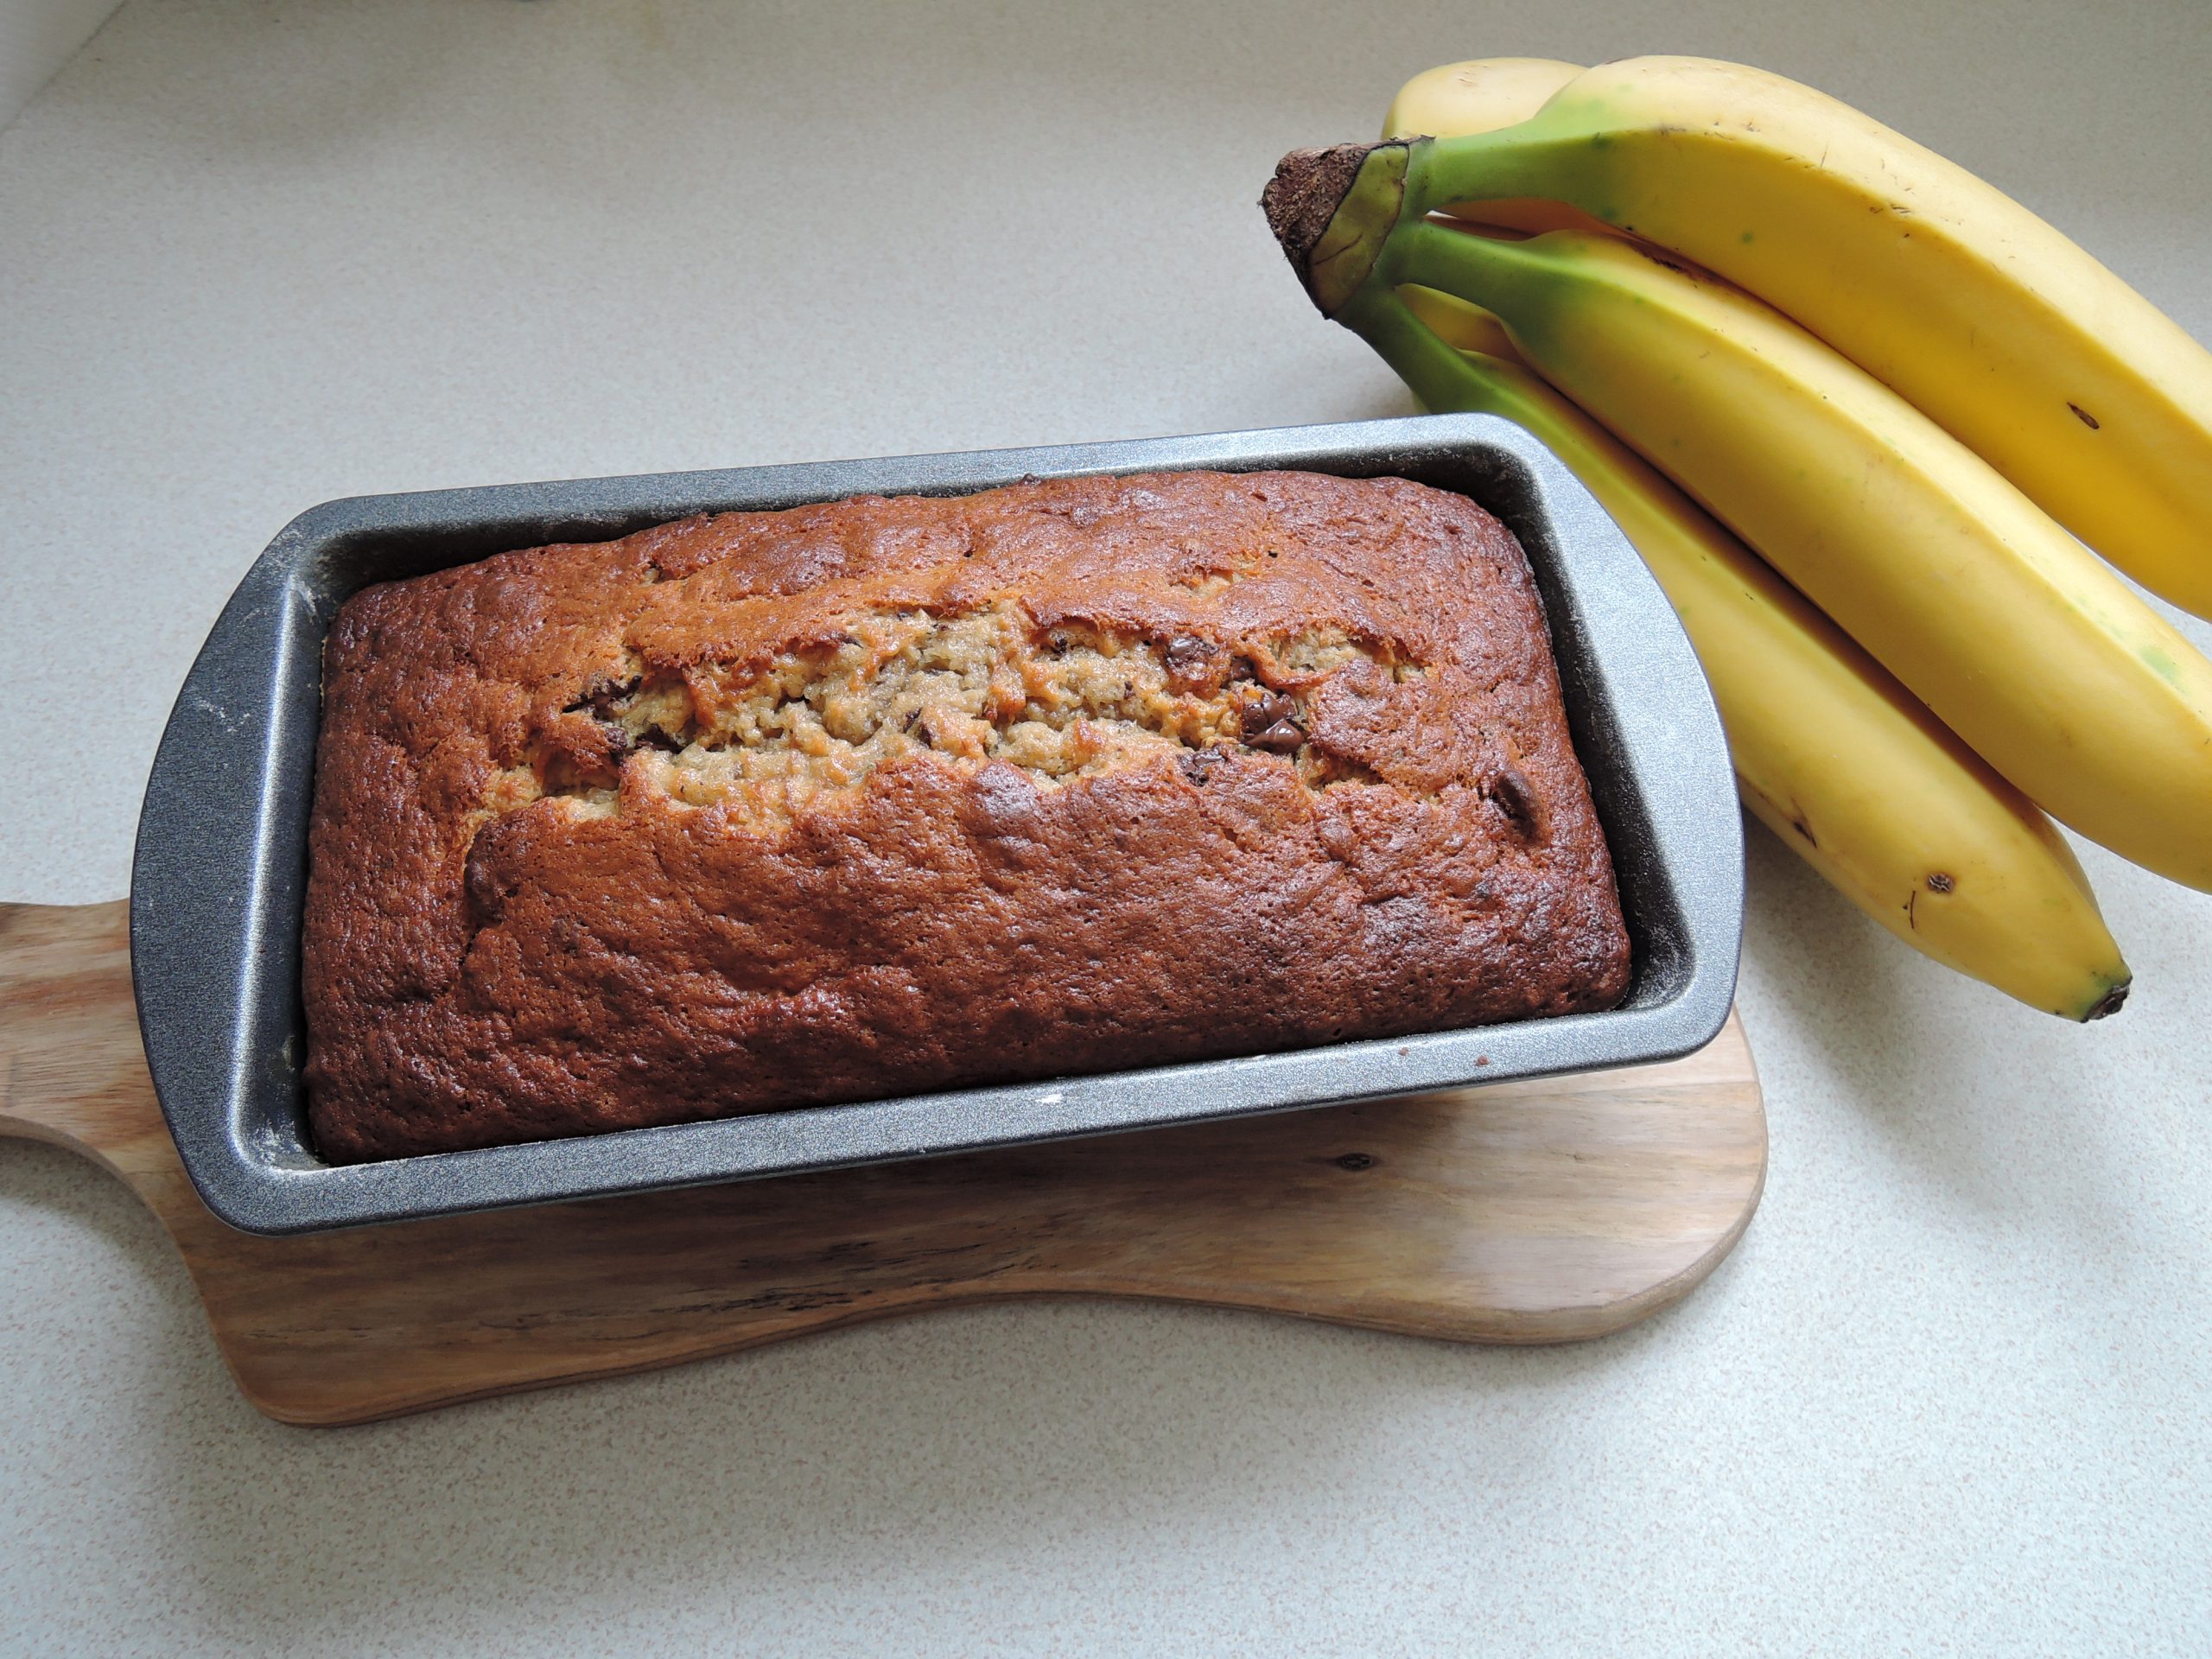 Yes, it is the perfect banana bread